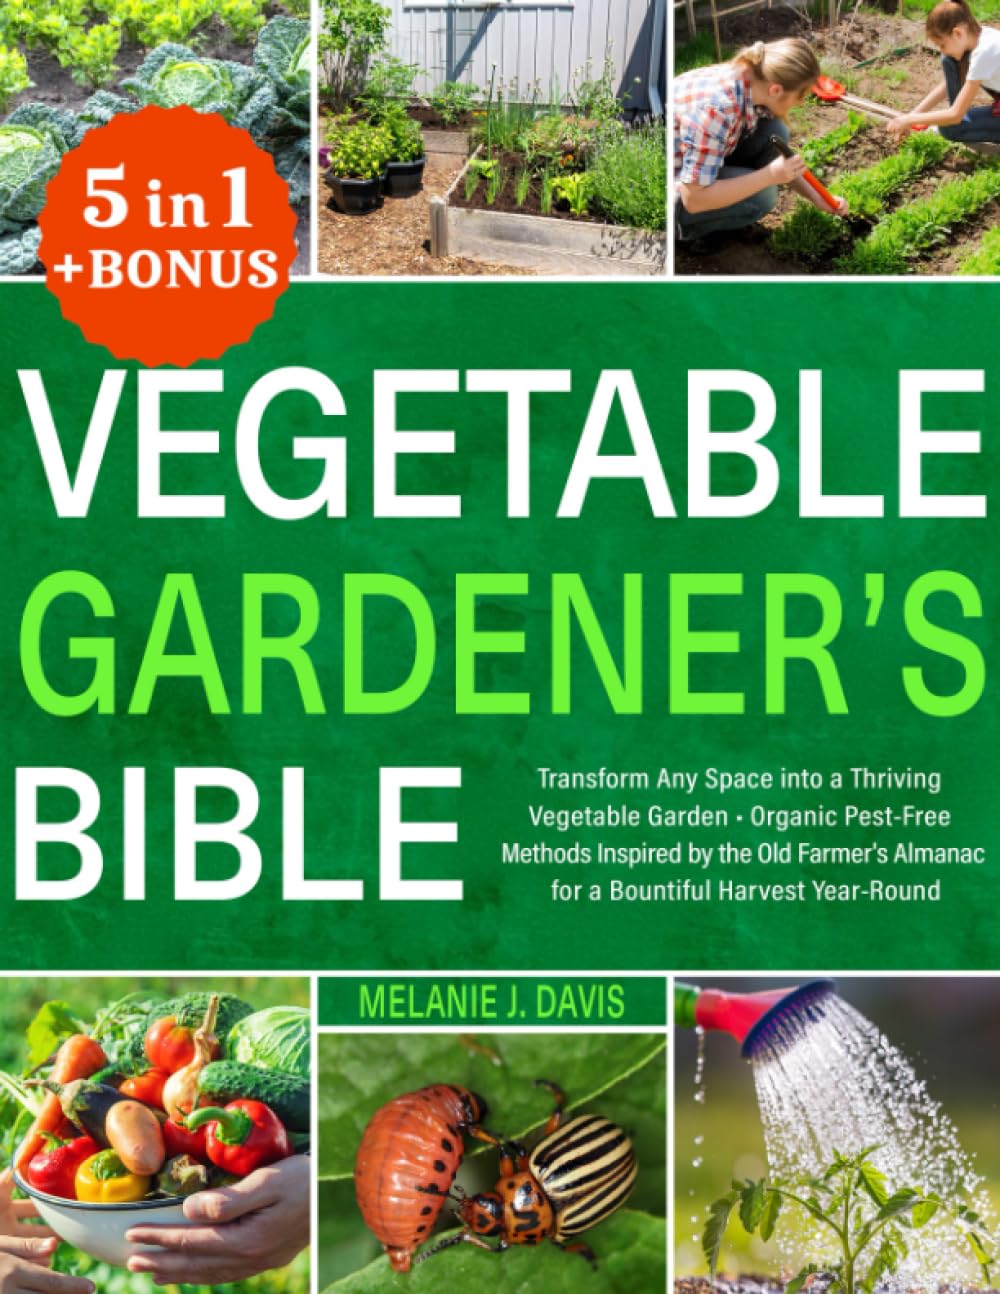 Vegetable Gardener's Bible: [5 in 1] • Transform Any Space into a Thriving Vegetable Garden • Organic Pest-Free Methods Inspired by the Old Farmer's Almanac for a Bountiful Harvest Year-Round